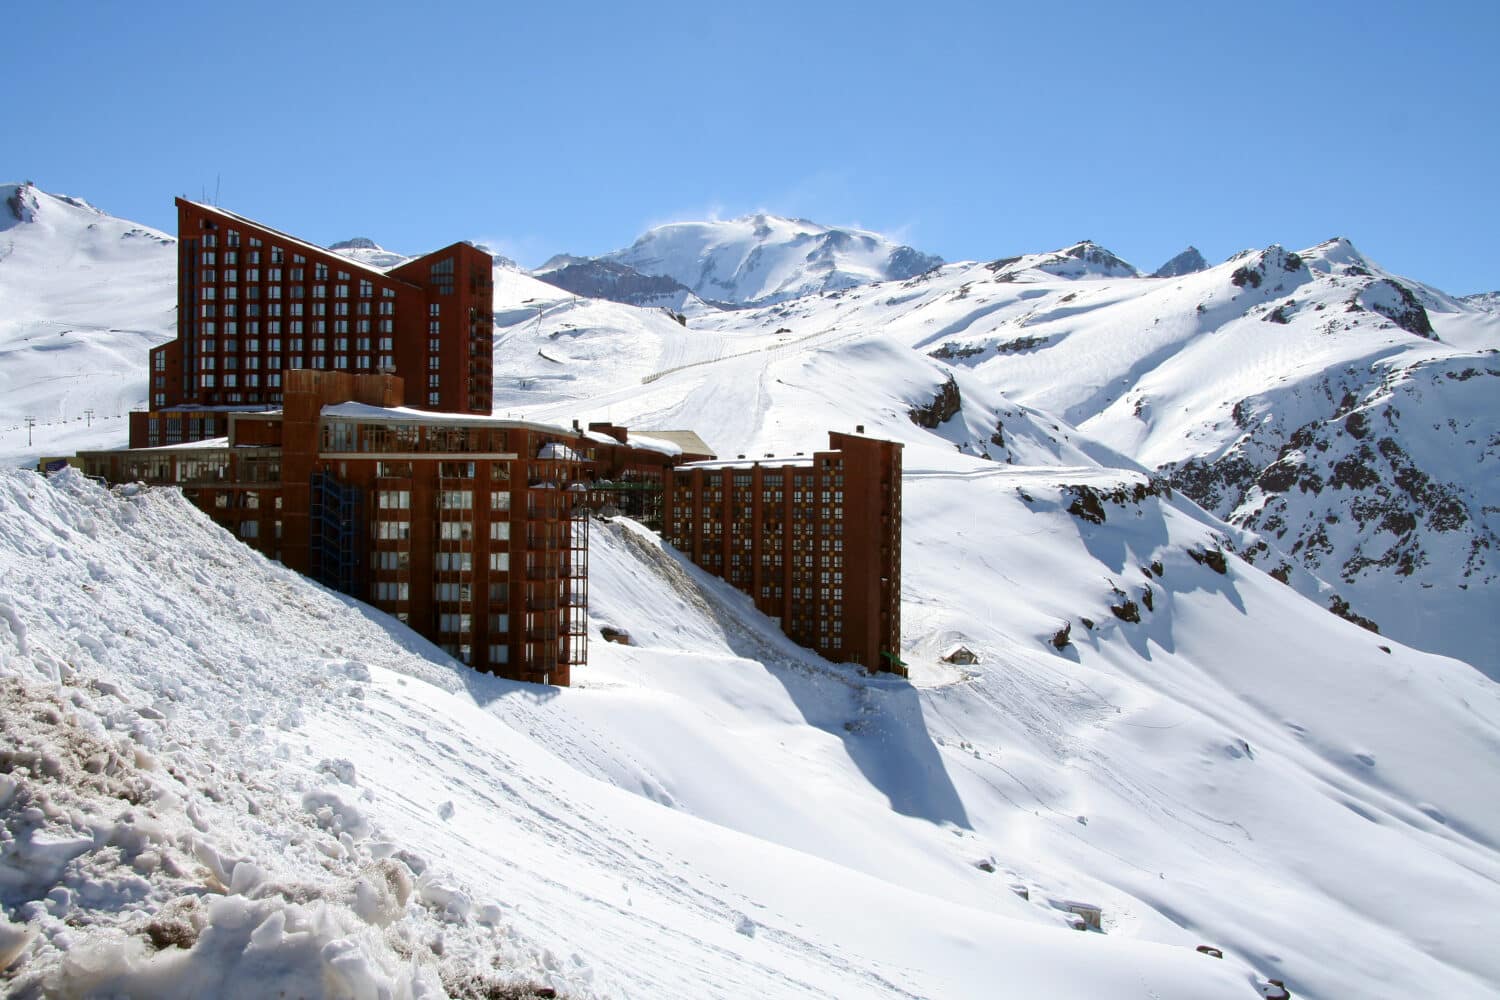 Big Brown hotels on the hillside of a big snow mountain